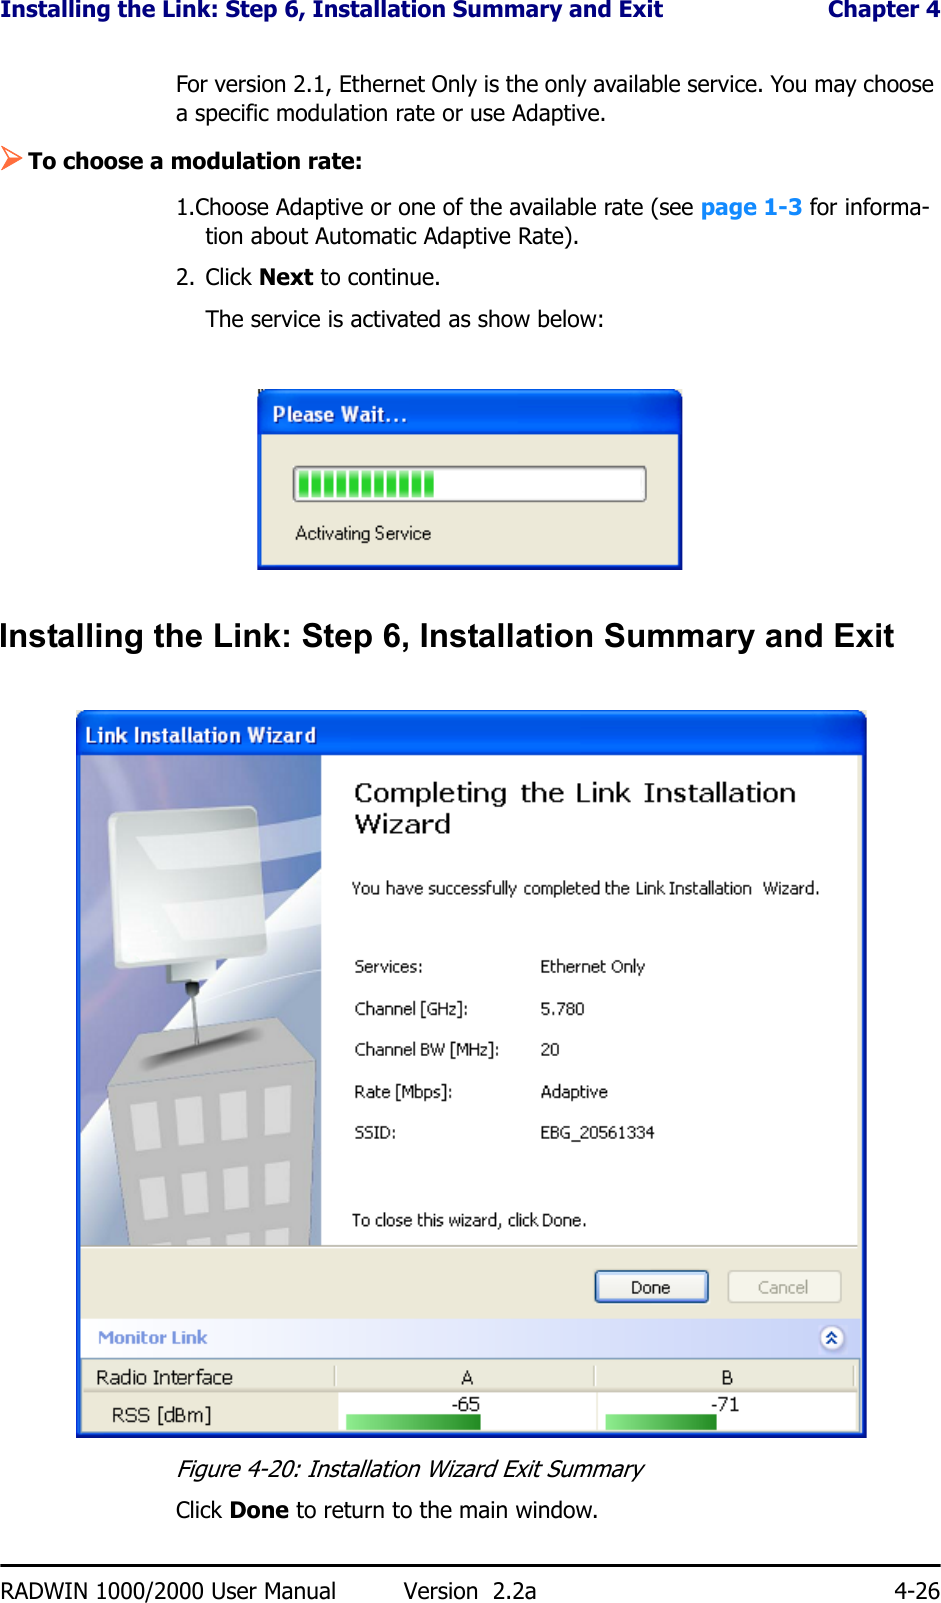 Installing the Link: Step 6, Installation Summary and Exit  Chapter 4RADWIN 1000/2000 User Manual Version  2.2a 4-26For version 2.1, Ethernet Only is the only available service. You may choose a specific modulation rate or use Adaptive.¾To choose a modulation rate:1.Choose Adaptive or one of the available rate (see page 1-3 for informa-tion about Automatic Adaptive Rate).2. Click Next to continue.The service is activated as show below:Installing the Link: Step 6, Installation Summary and ExitFigure 4-20: Installation Wizard Exit Summary Click Done to return to the main window.